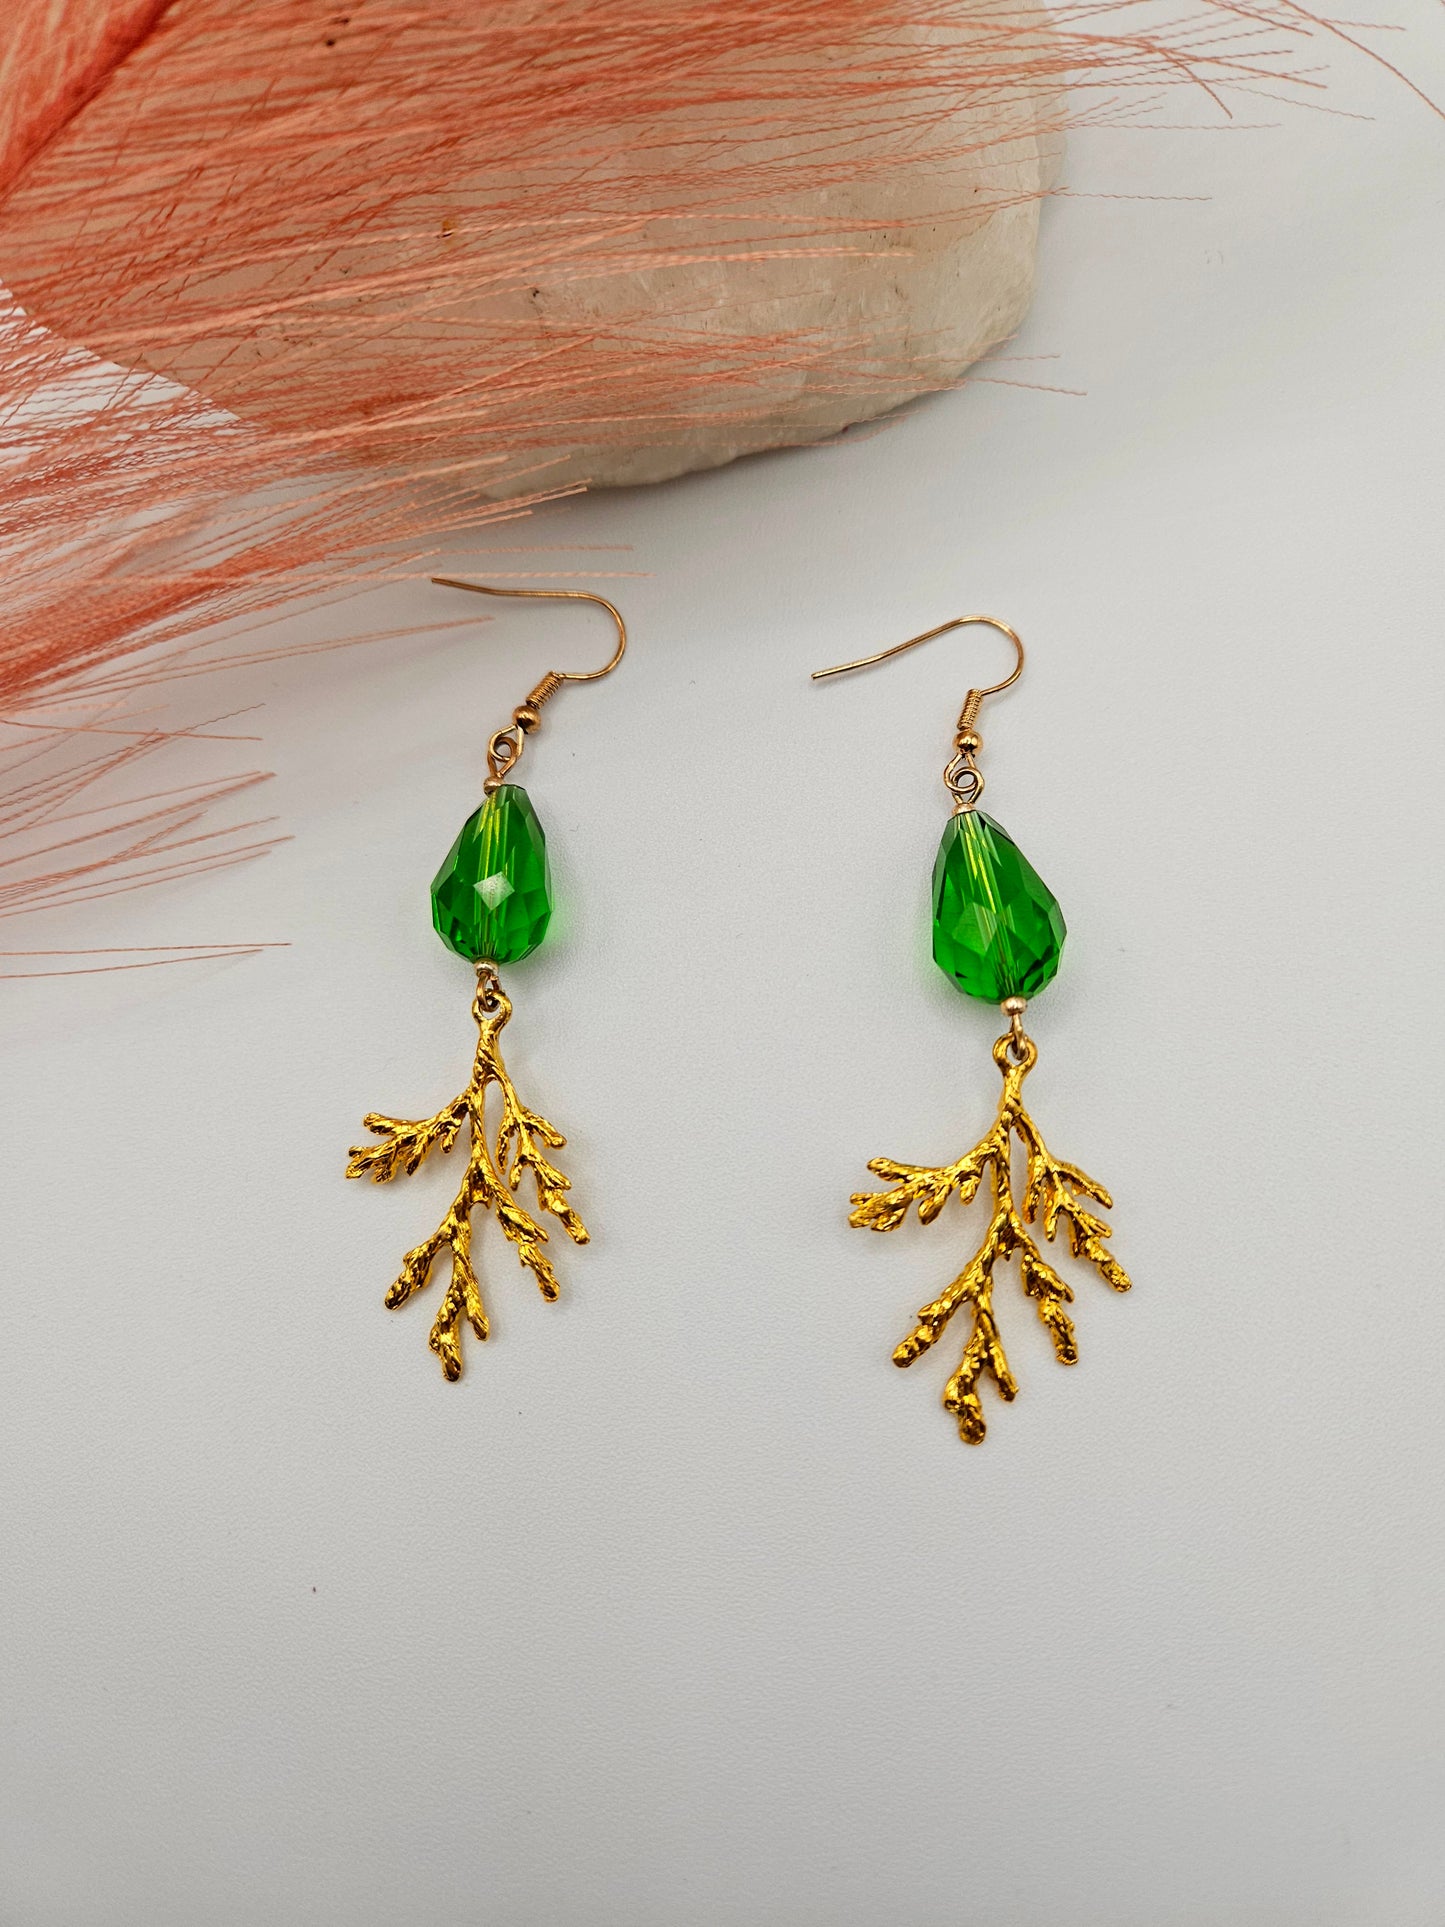 Cedar and green vintage glass drops